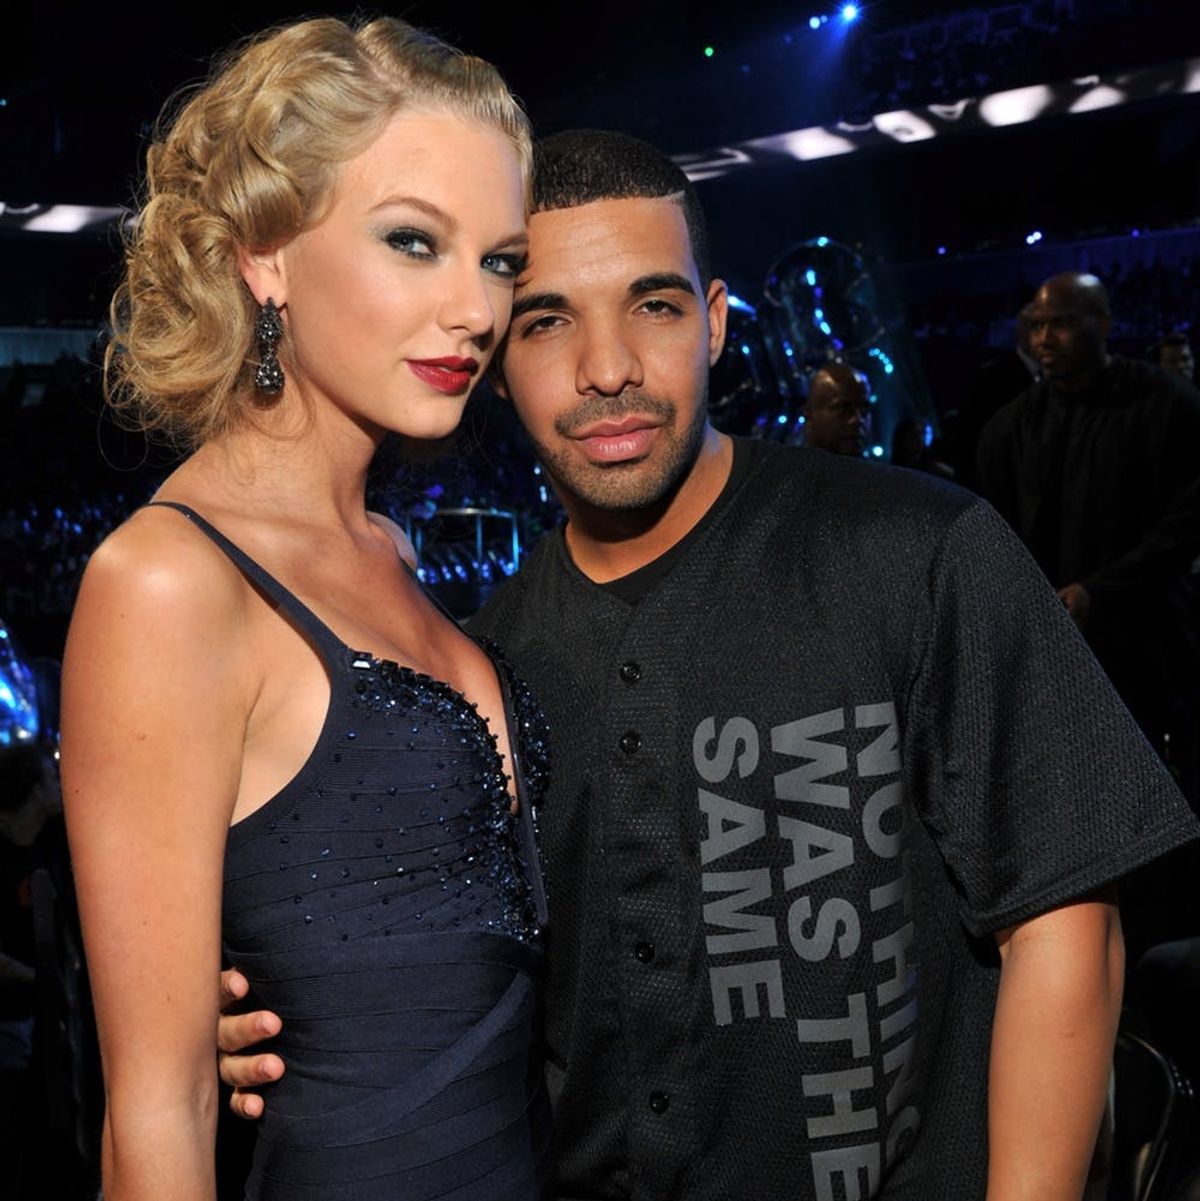 WTF: Things Are Heating Up Between Taylor Swift and Drake